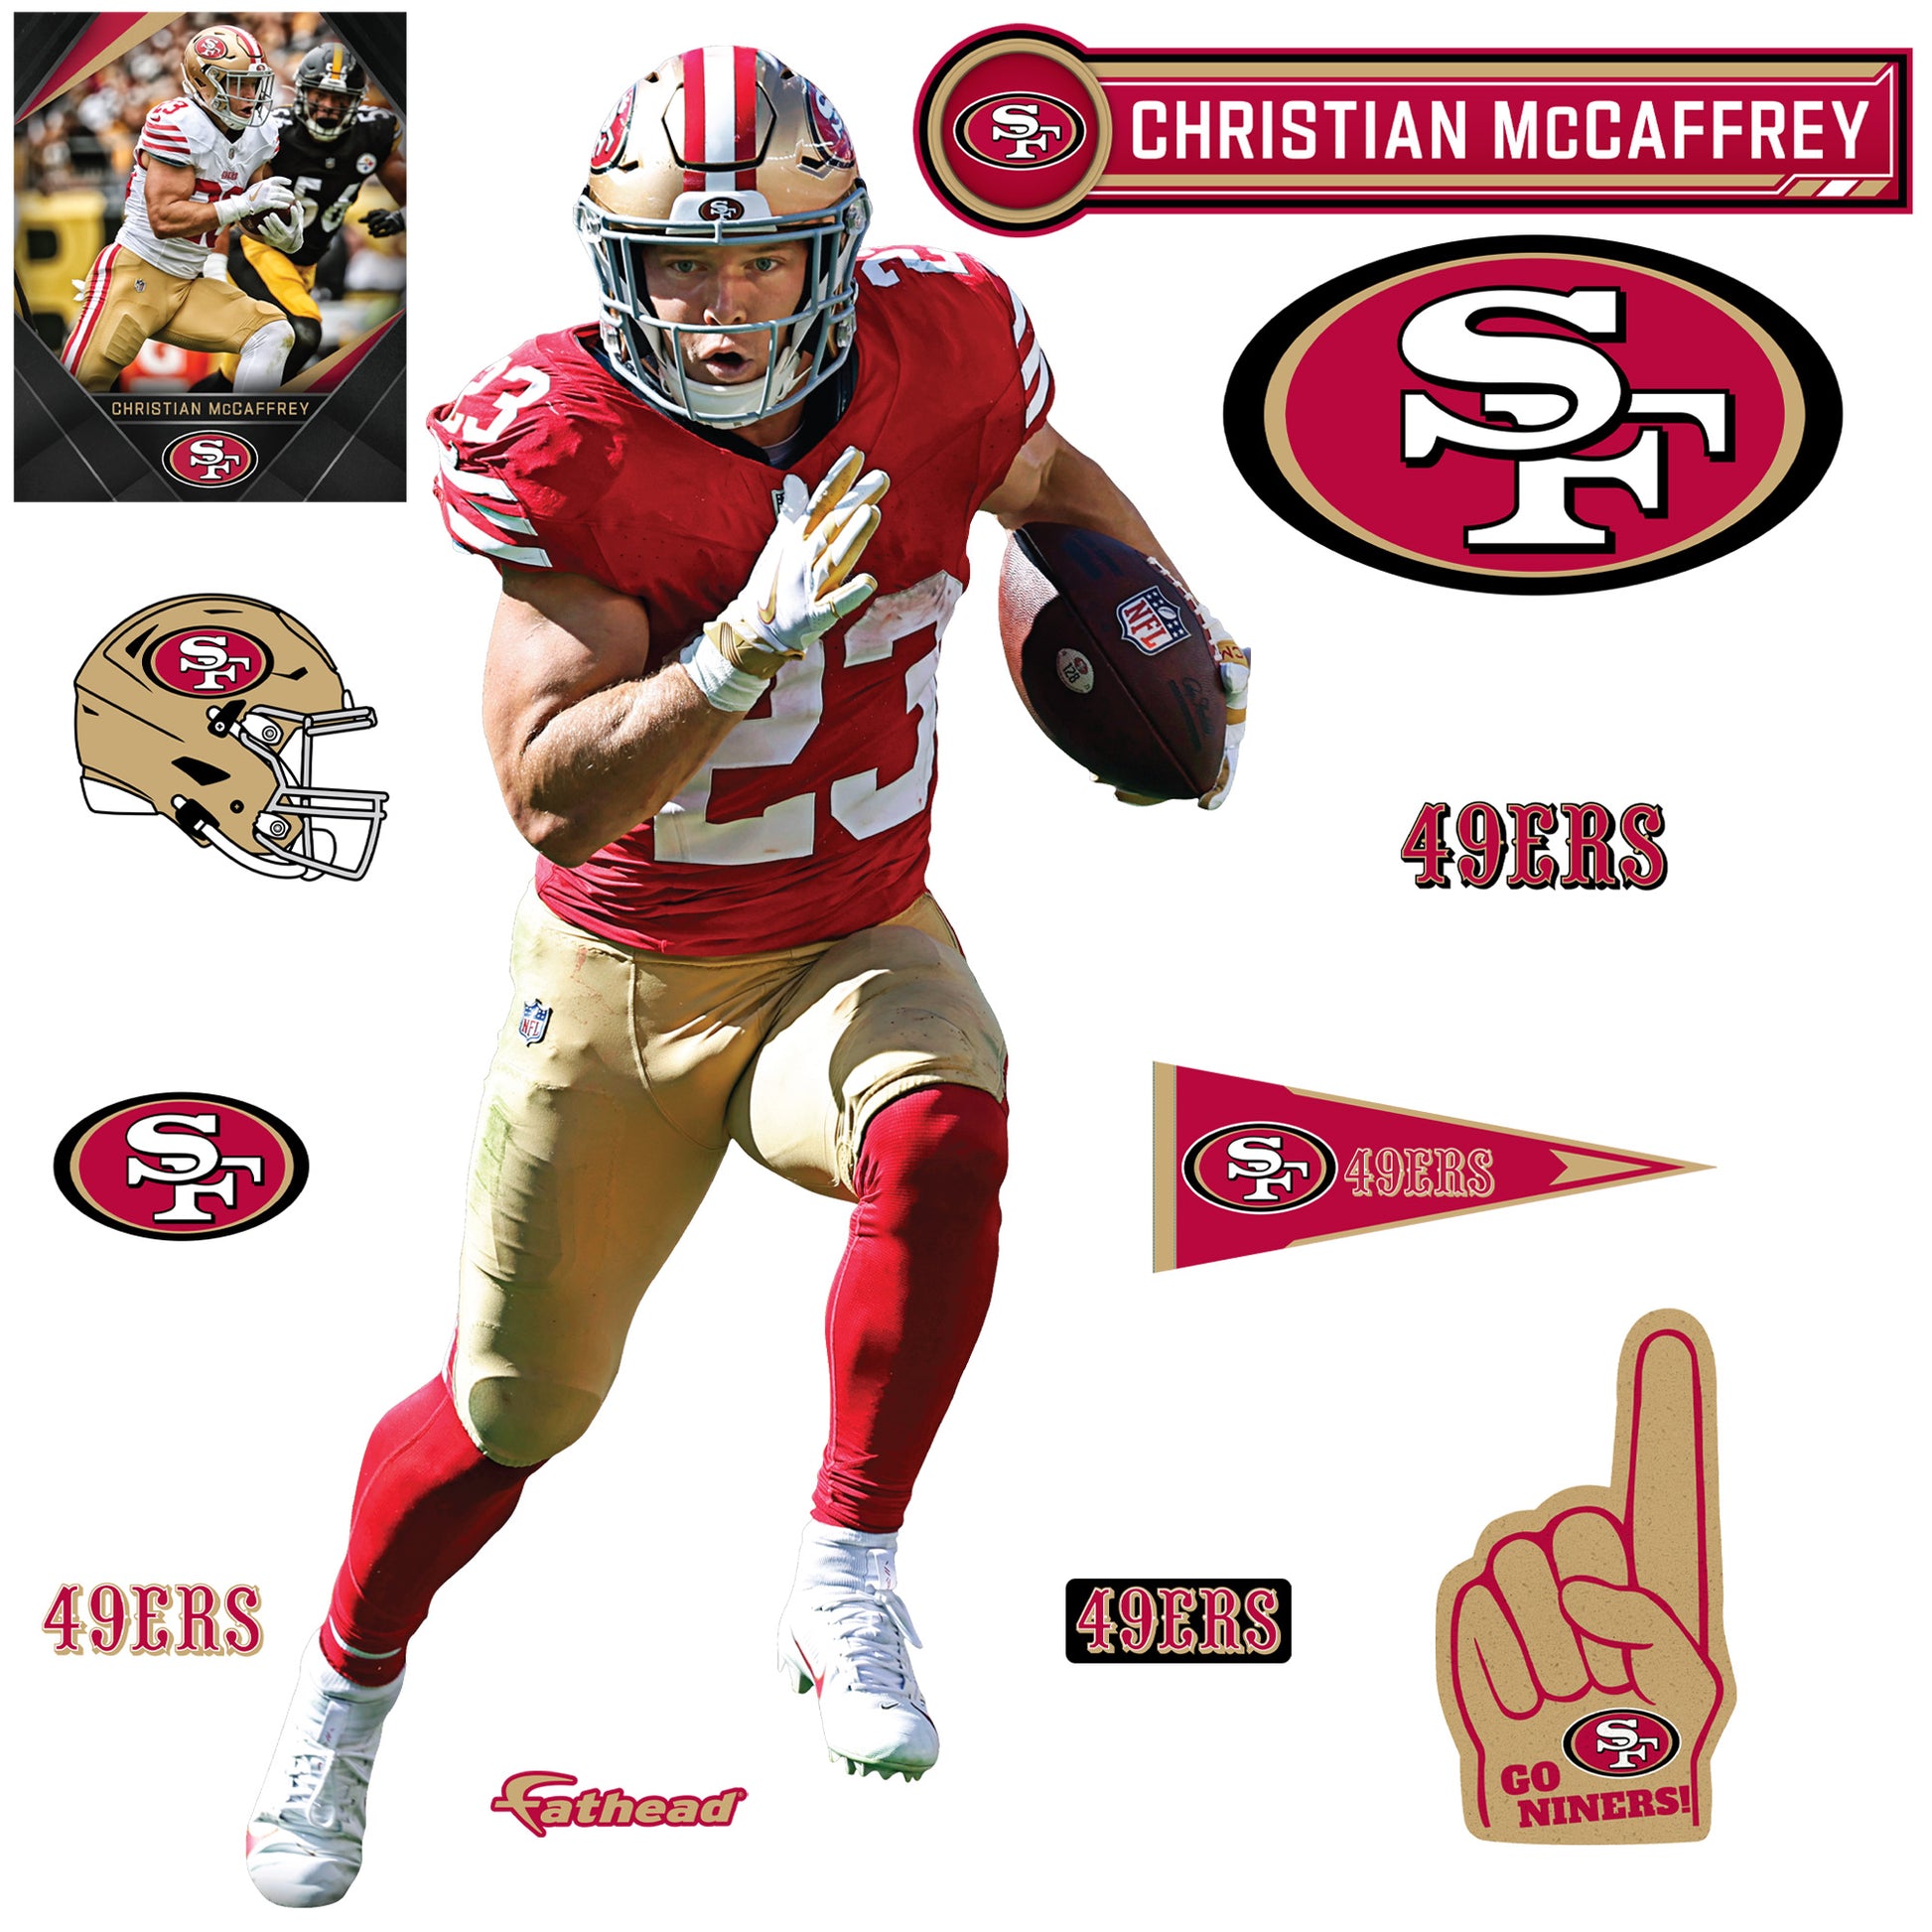 Christian McCaffrey's 49ers jersey one of NFL's top sellers